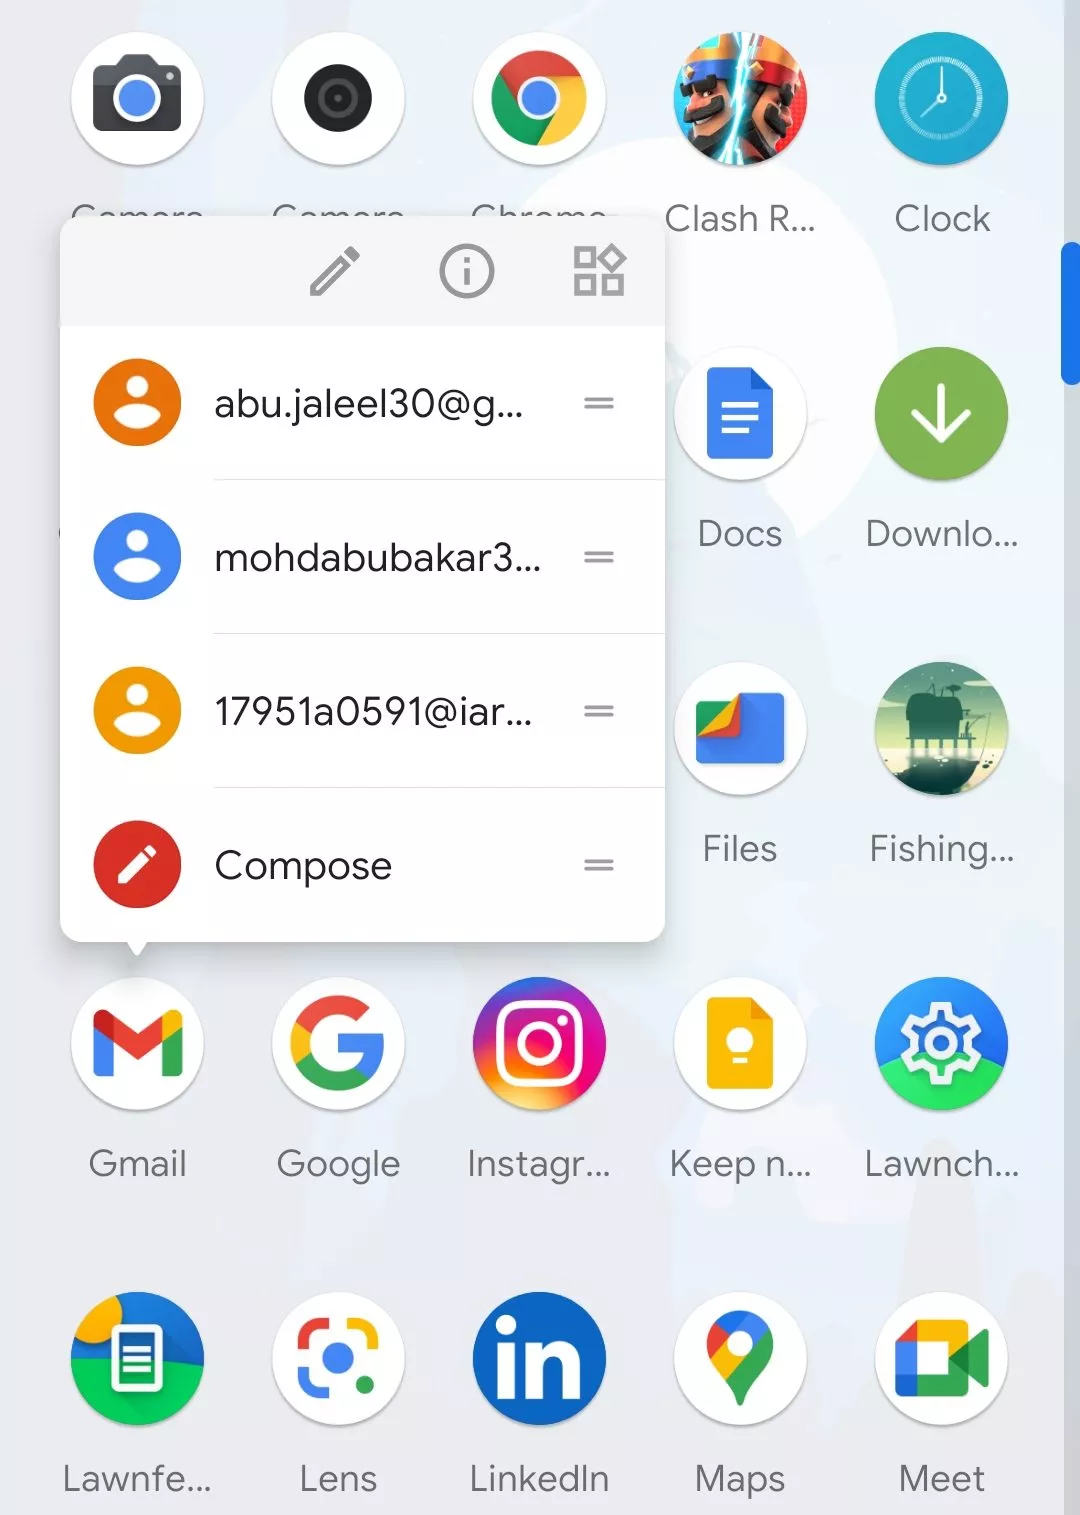 new gmail icon - how to get the old google icons back if you dont like the new ones